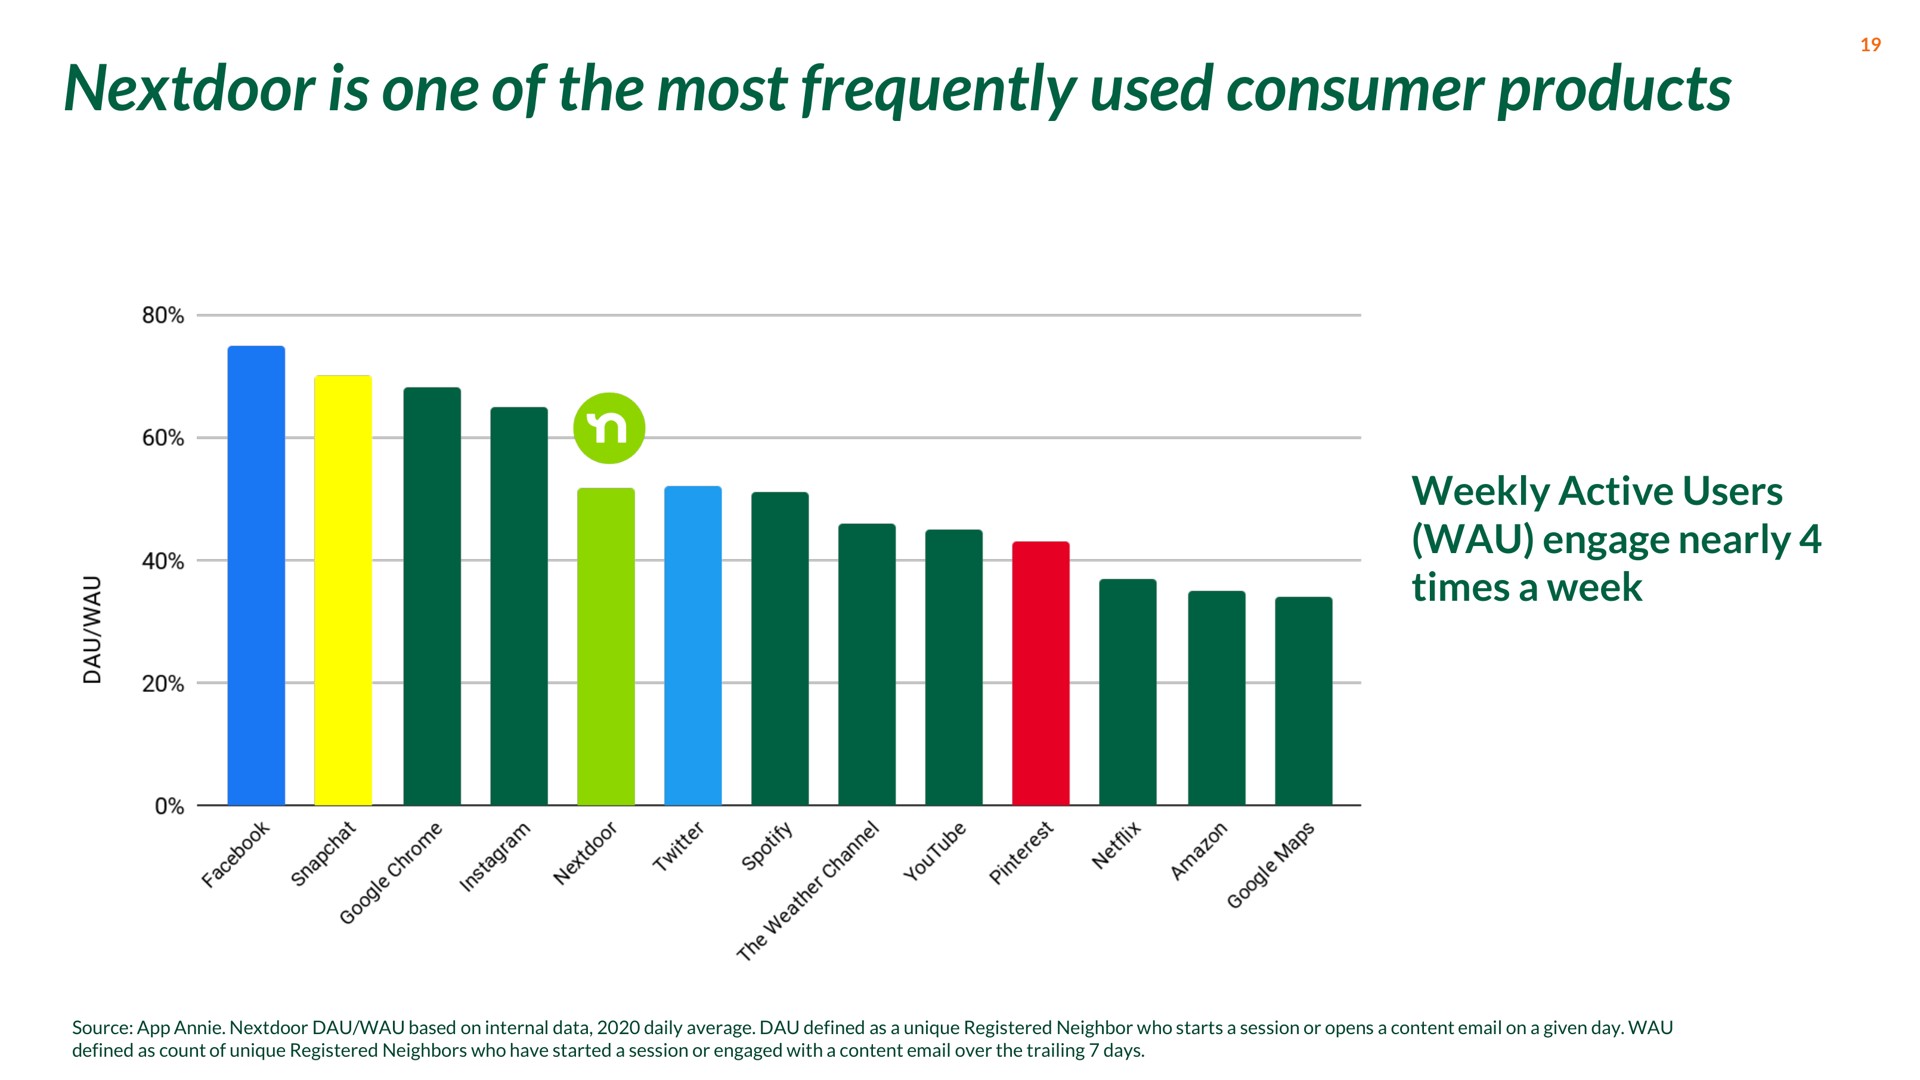 is one of the most frequently used consumer products | Nextdoor